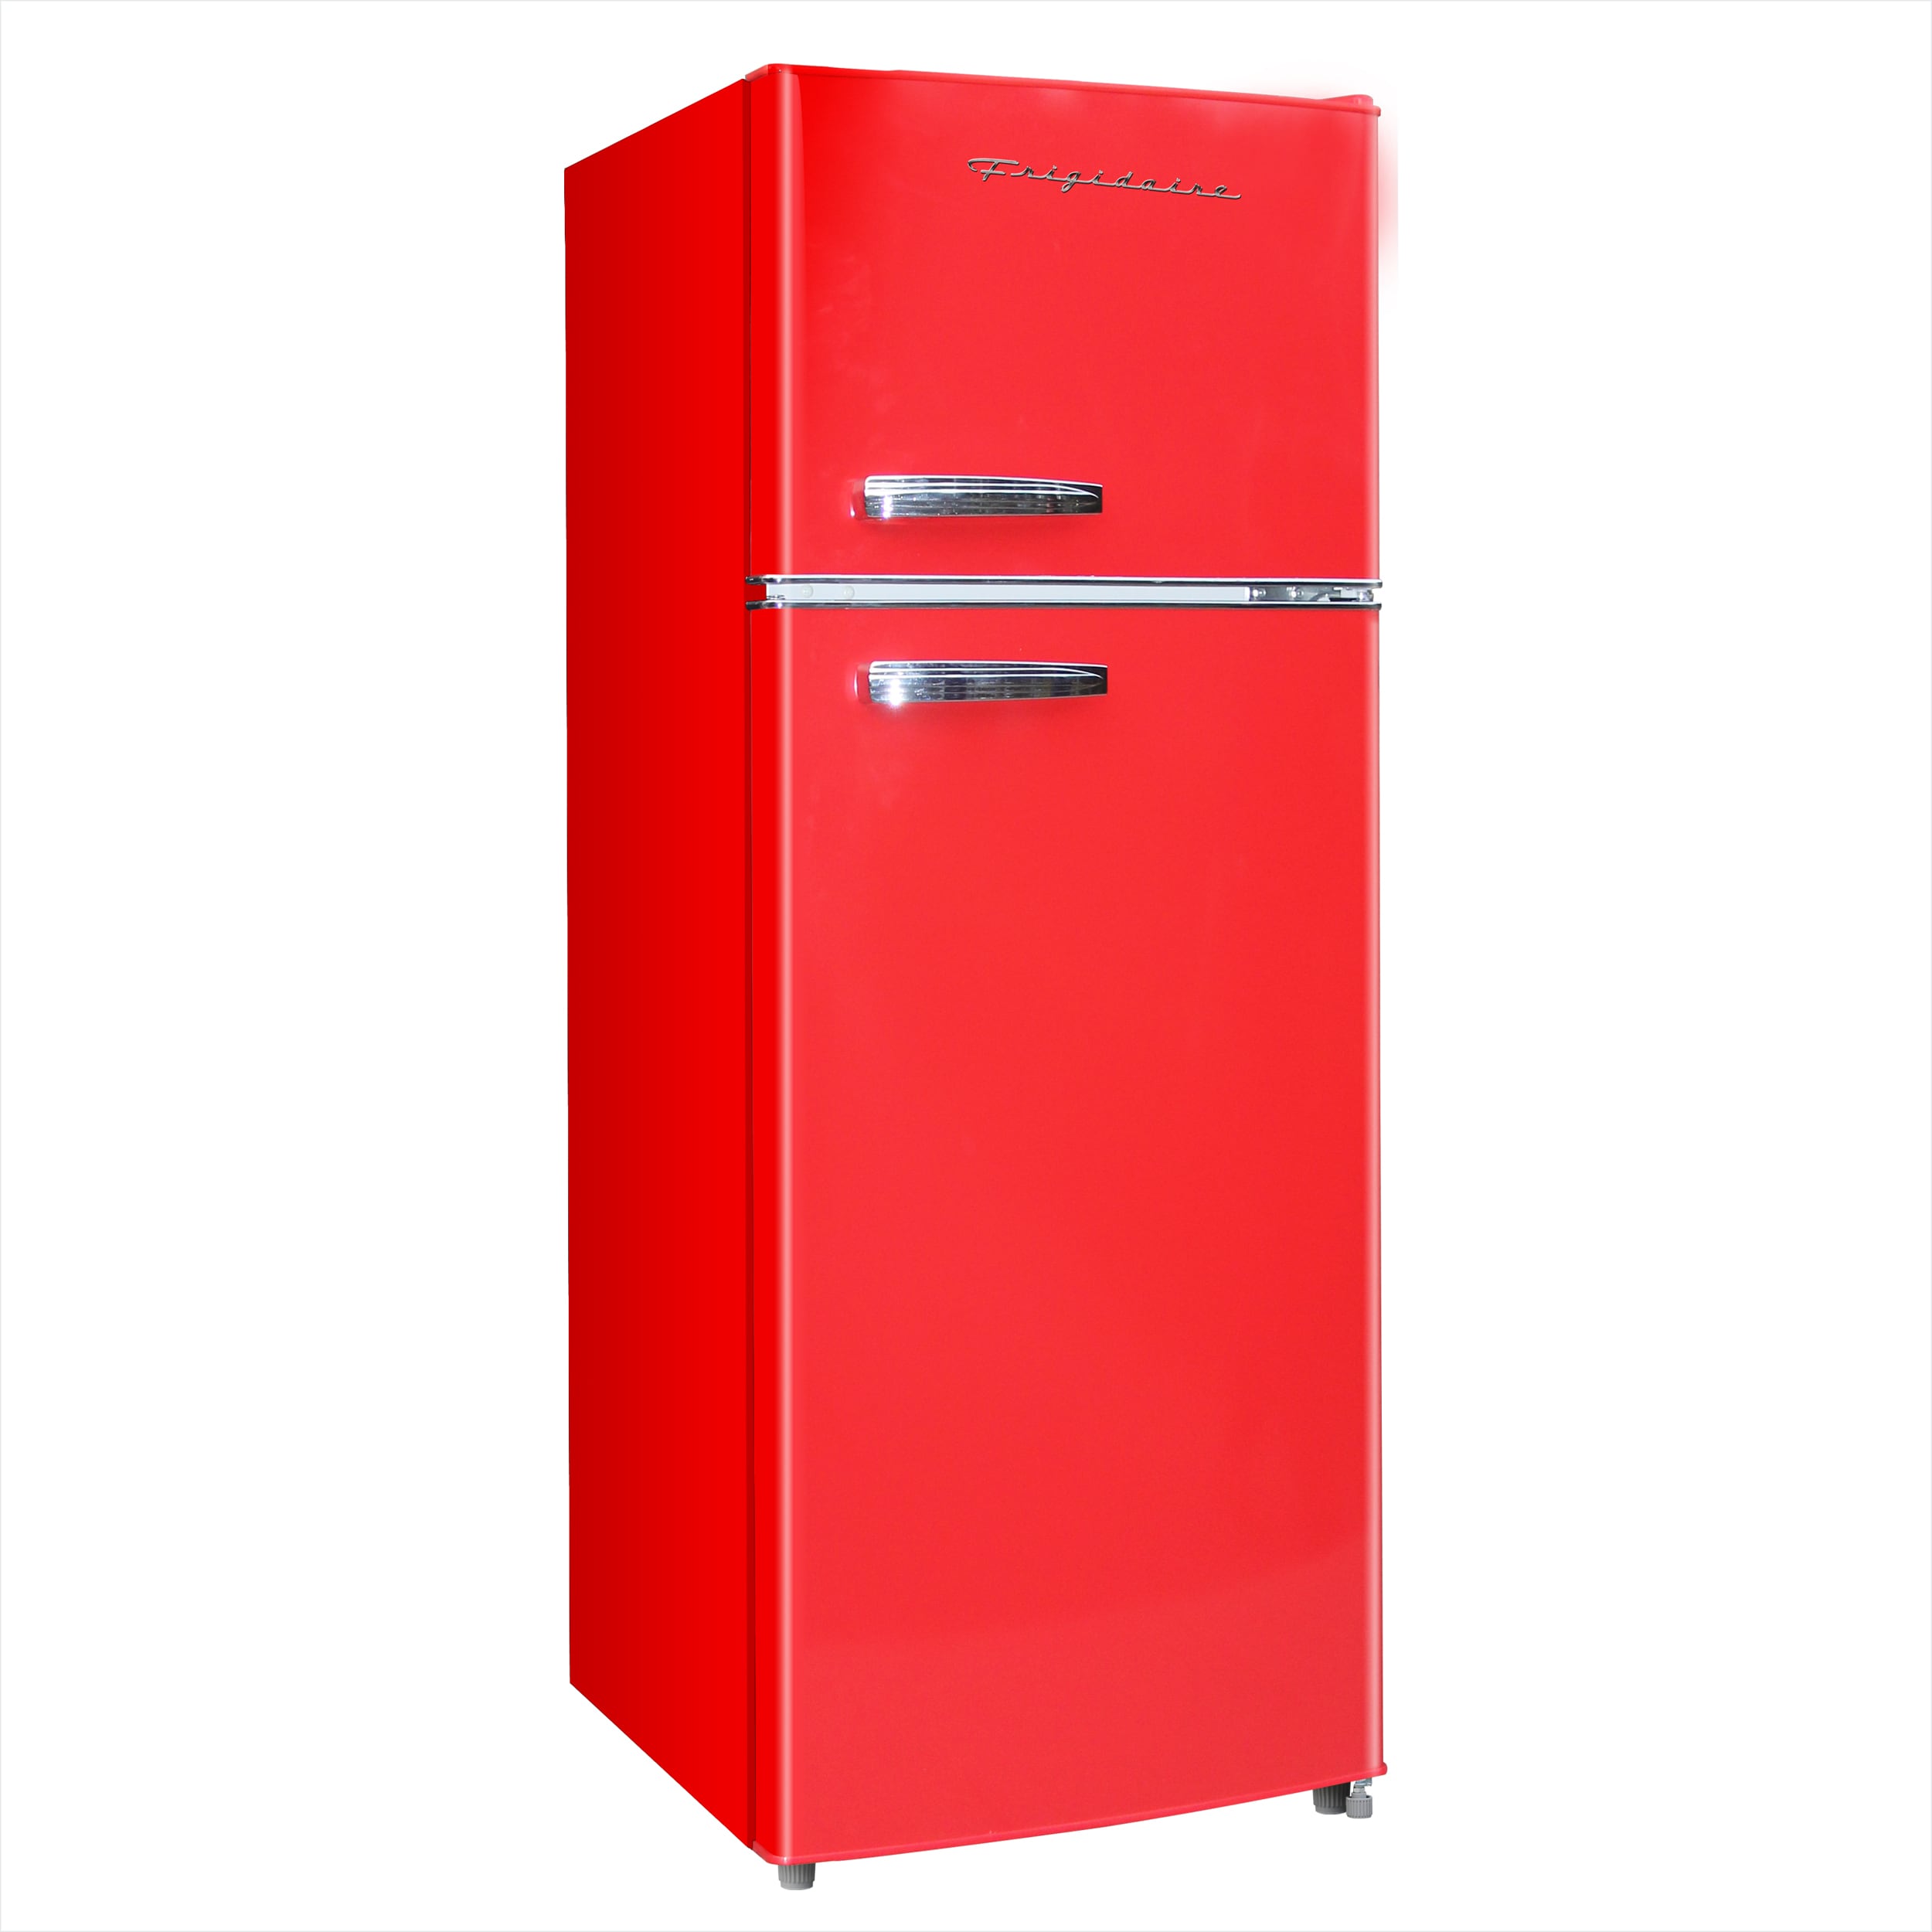 Red refrigerator at Lowes.com: Search Results